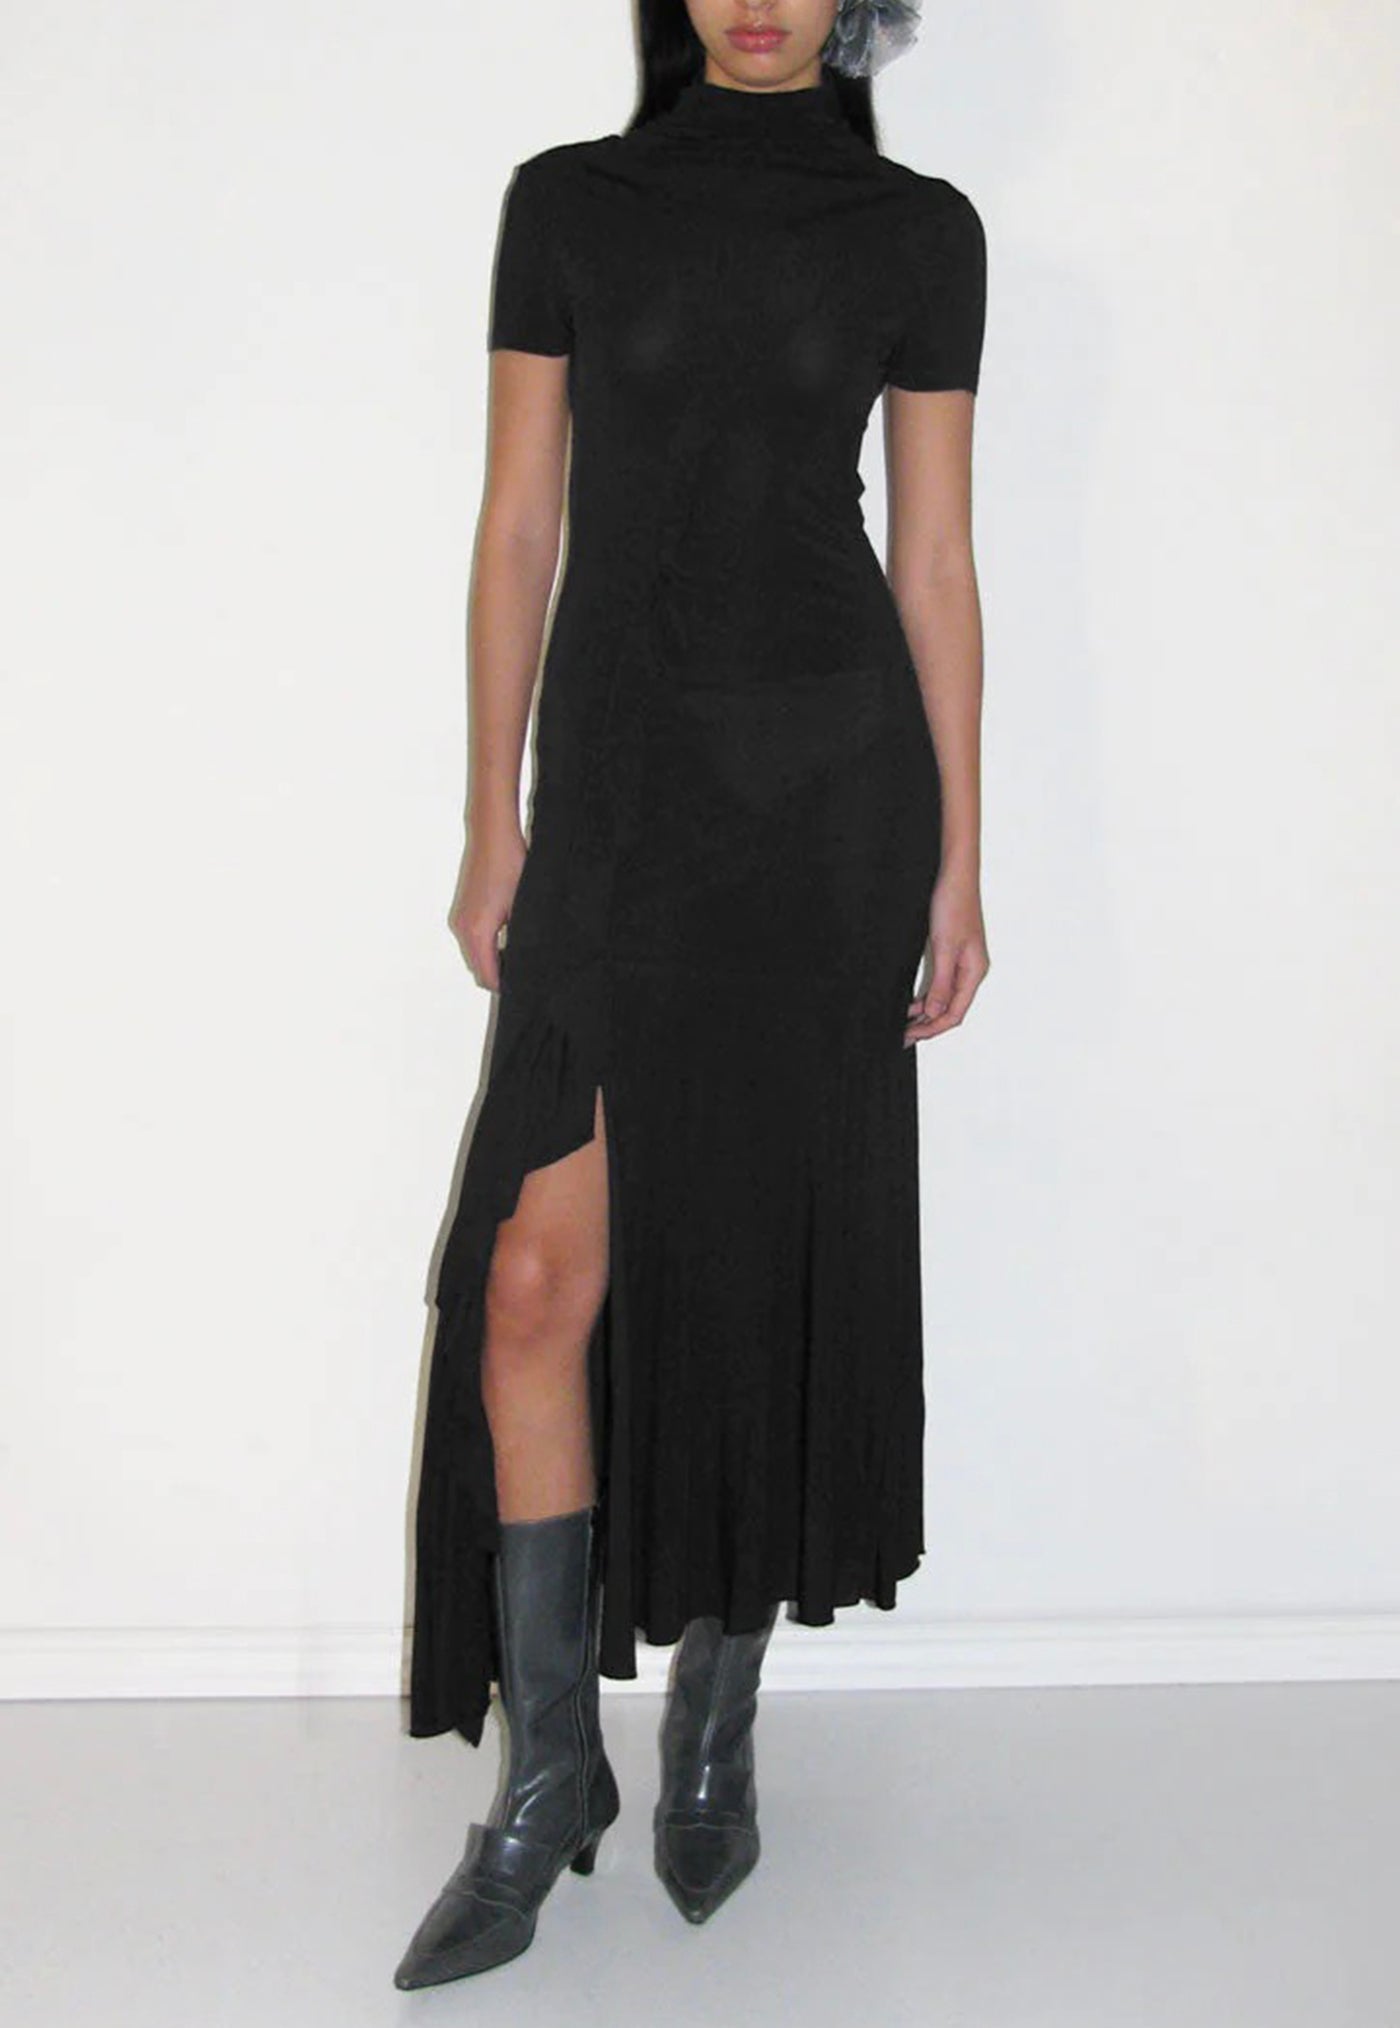 Wuato Dress - Black sold by Angel Divine